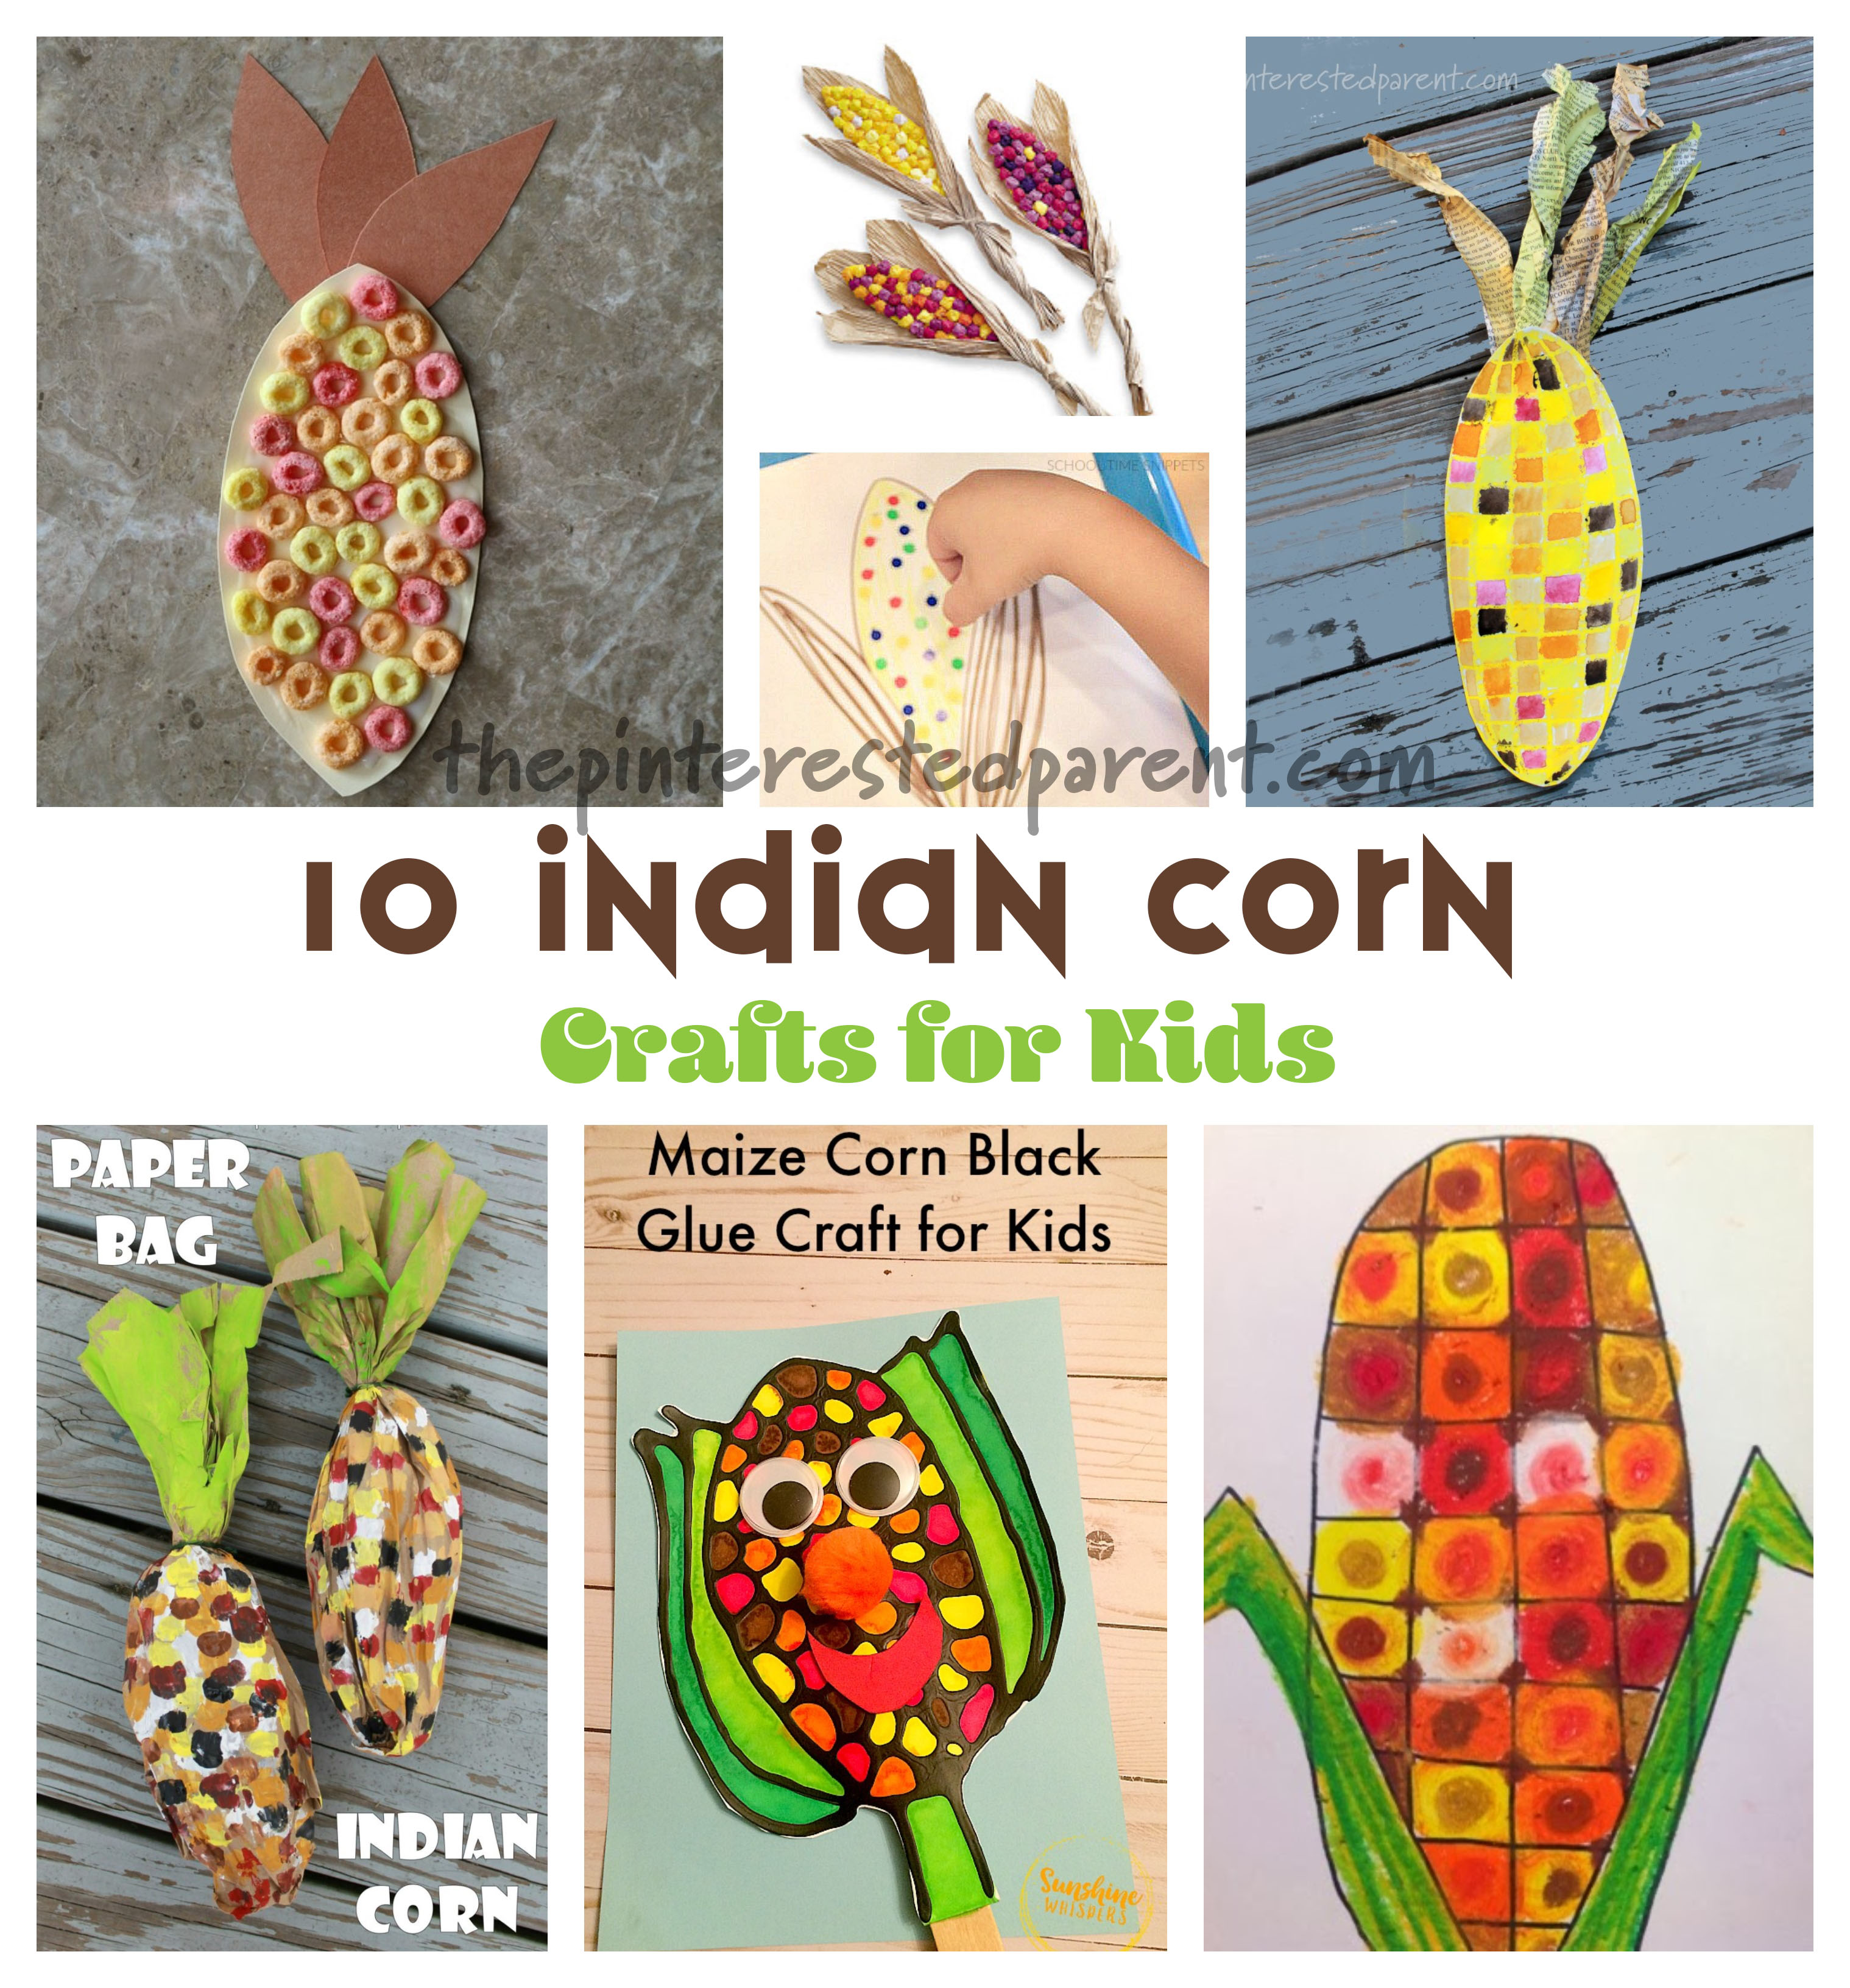 10 Indian corn crafts for kids for the fall and autumn. Kids arts & crafts